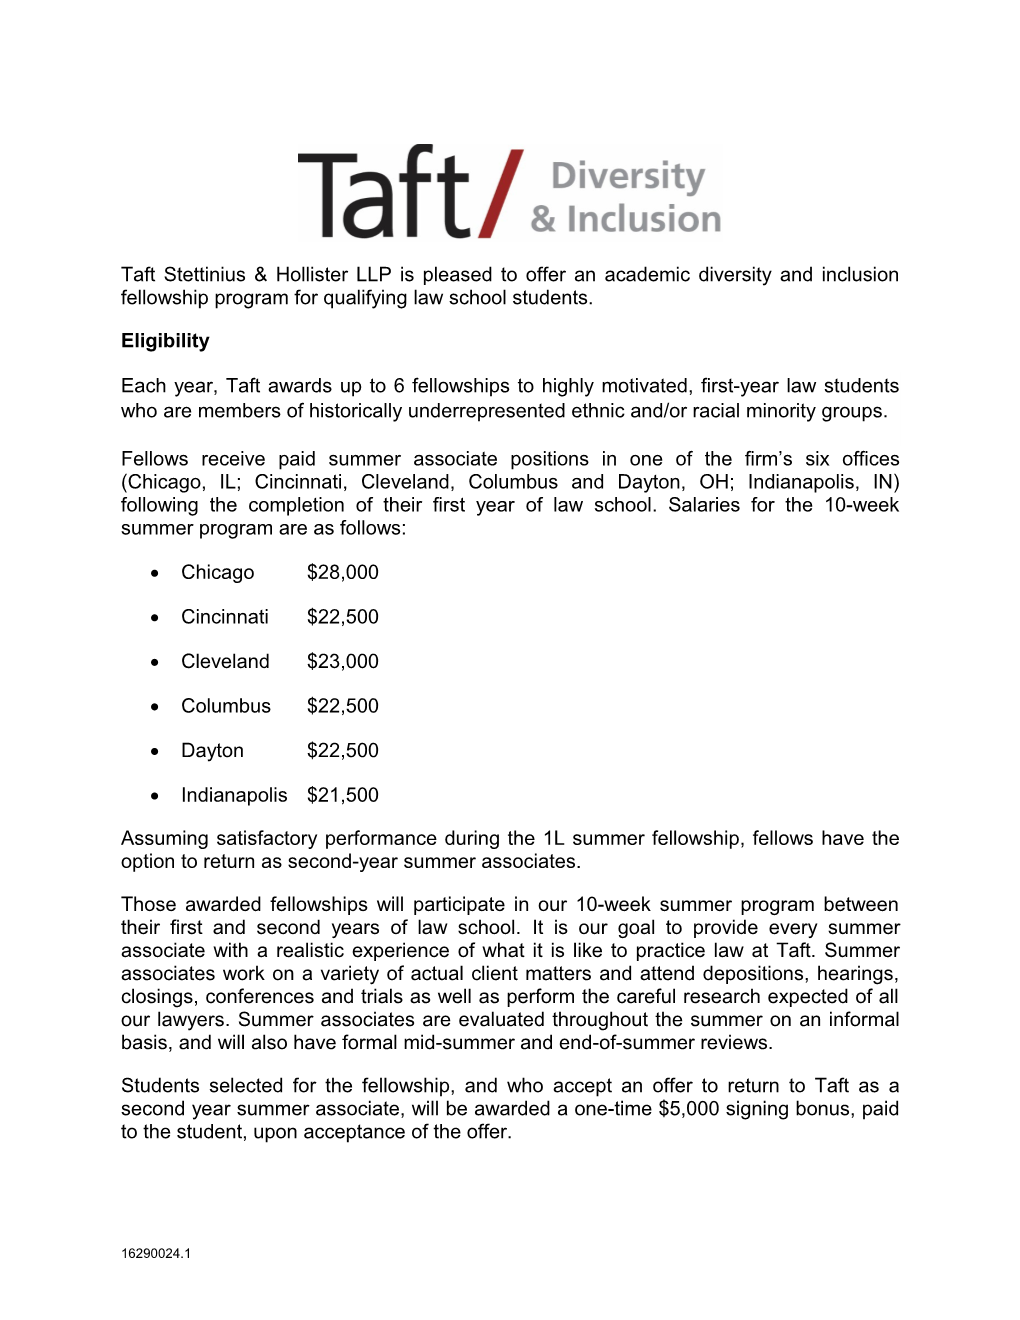 Taft Stettinius & Hollister LLP Is Pleased to Offer an Academic Diversity and Inclusion